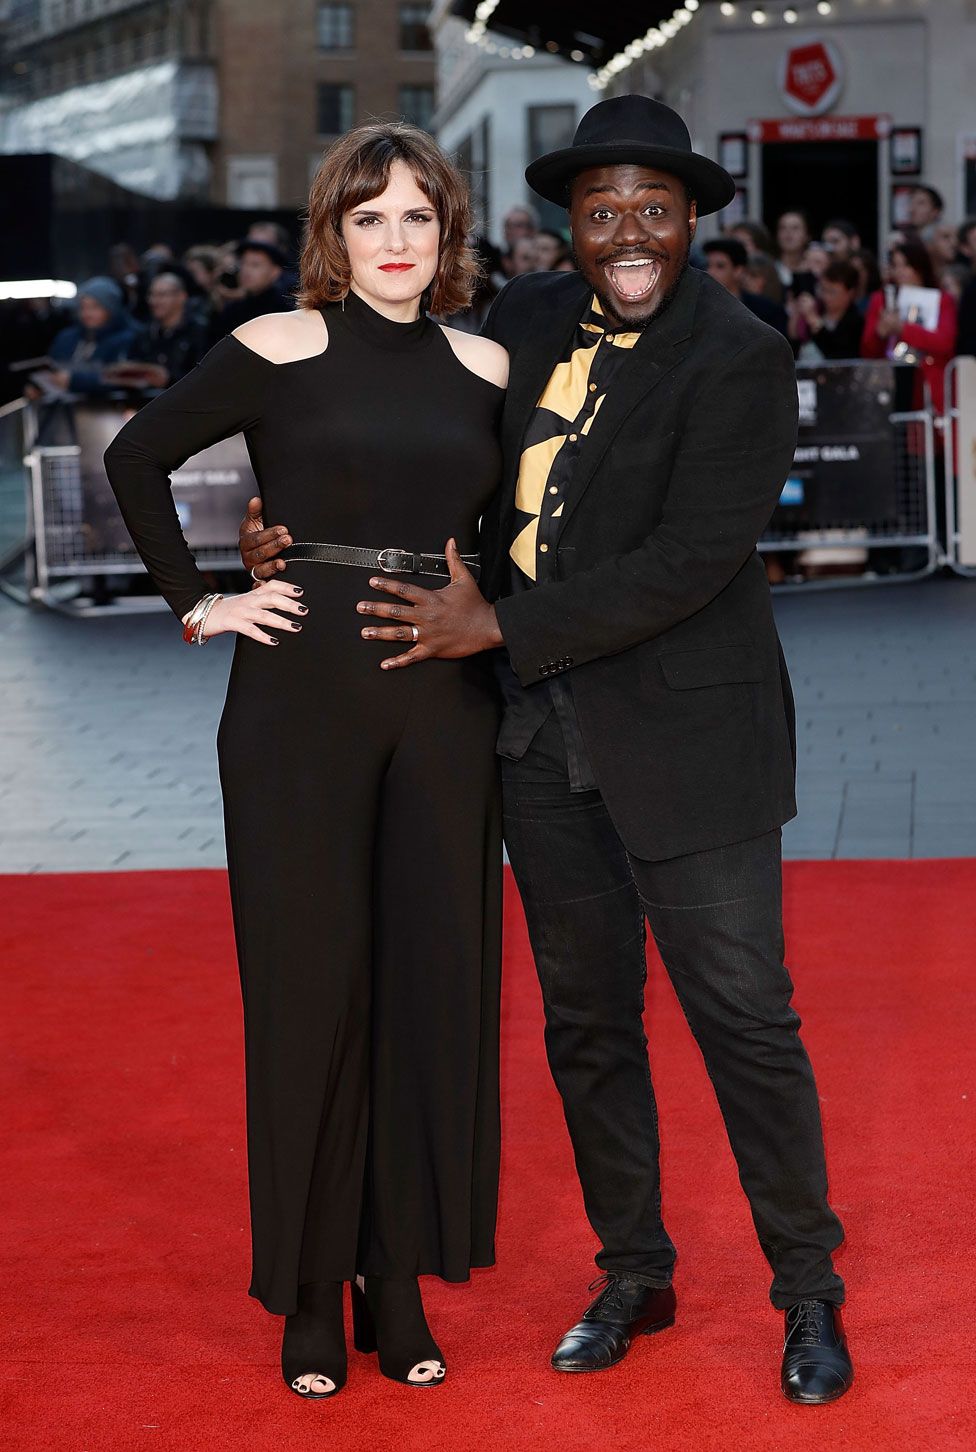 Anna and Babou Ceesay